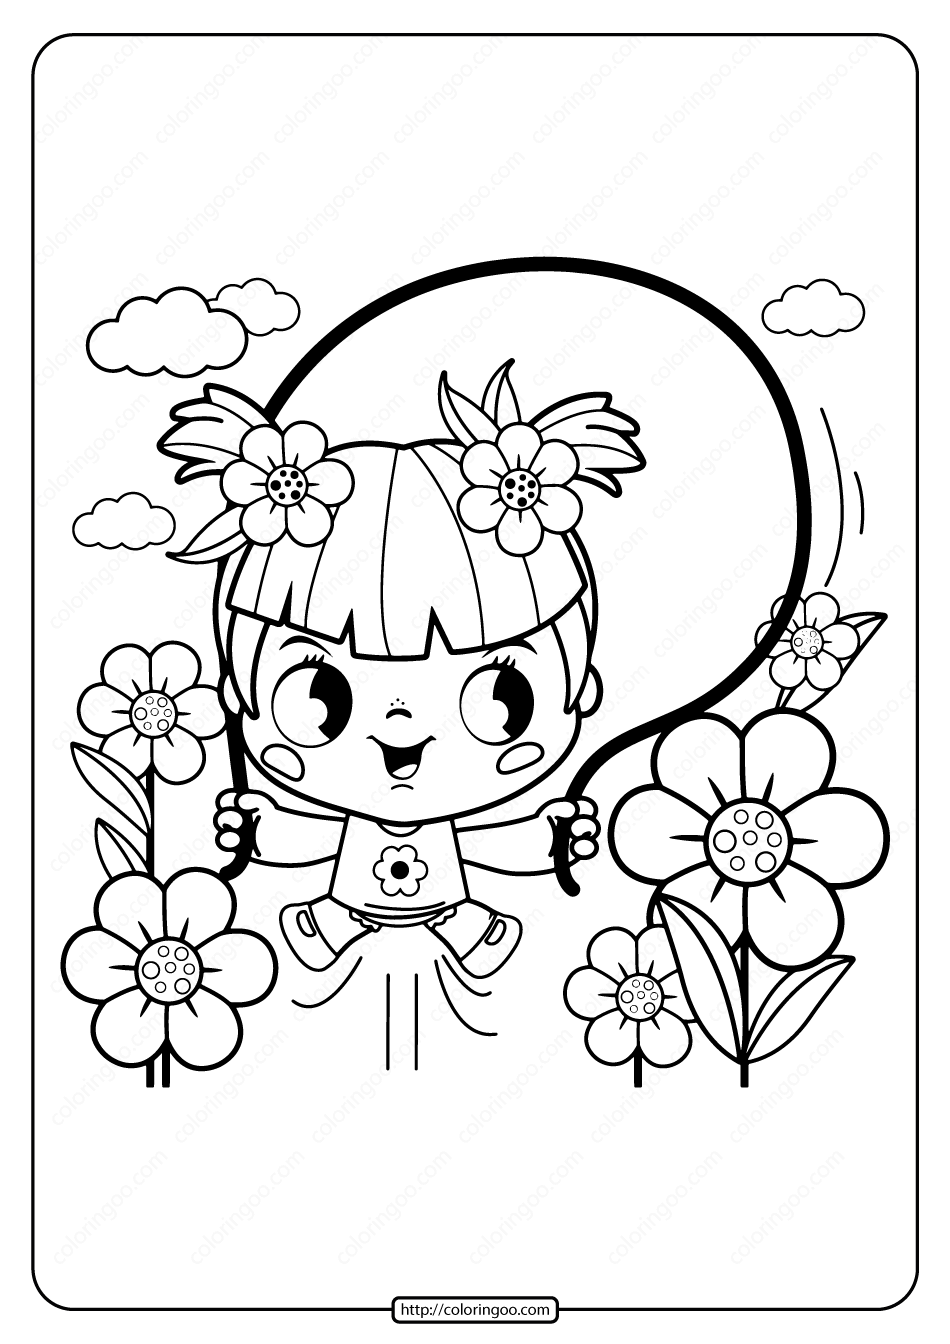 printable girl playing jump rope coloring page